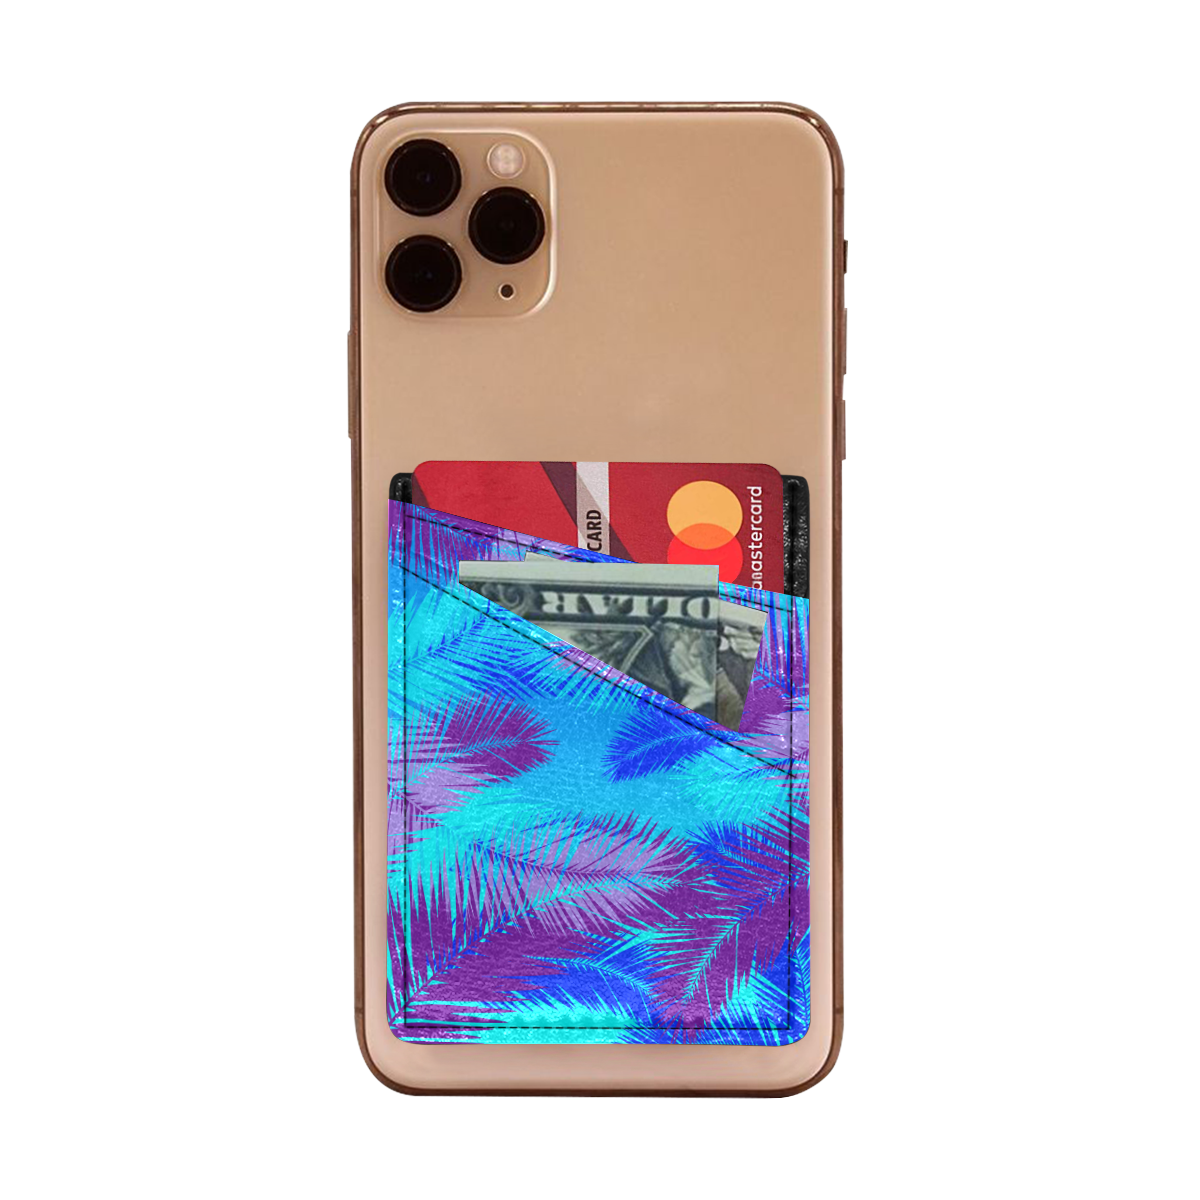 Summer Island Palm Tree Leaves Cell Phone Card Holder